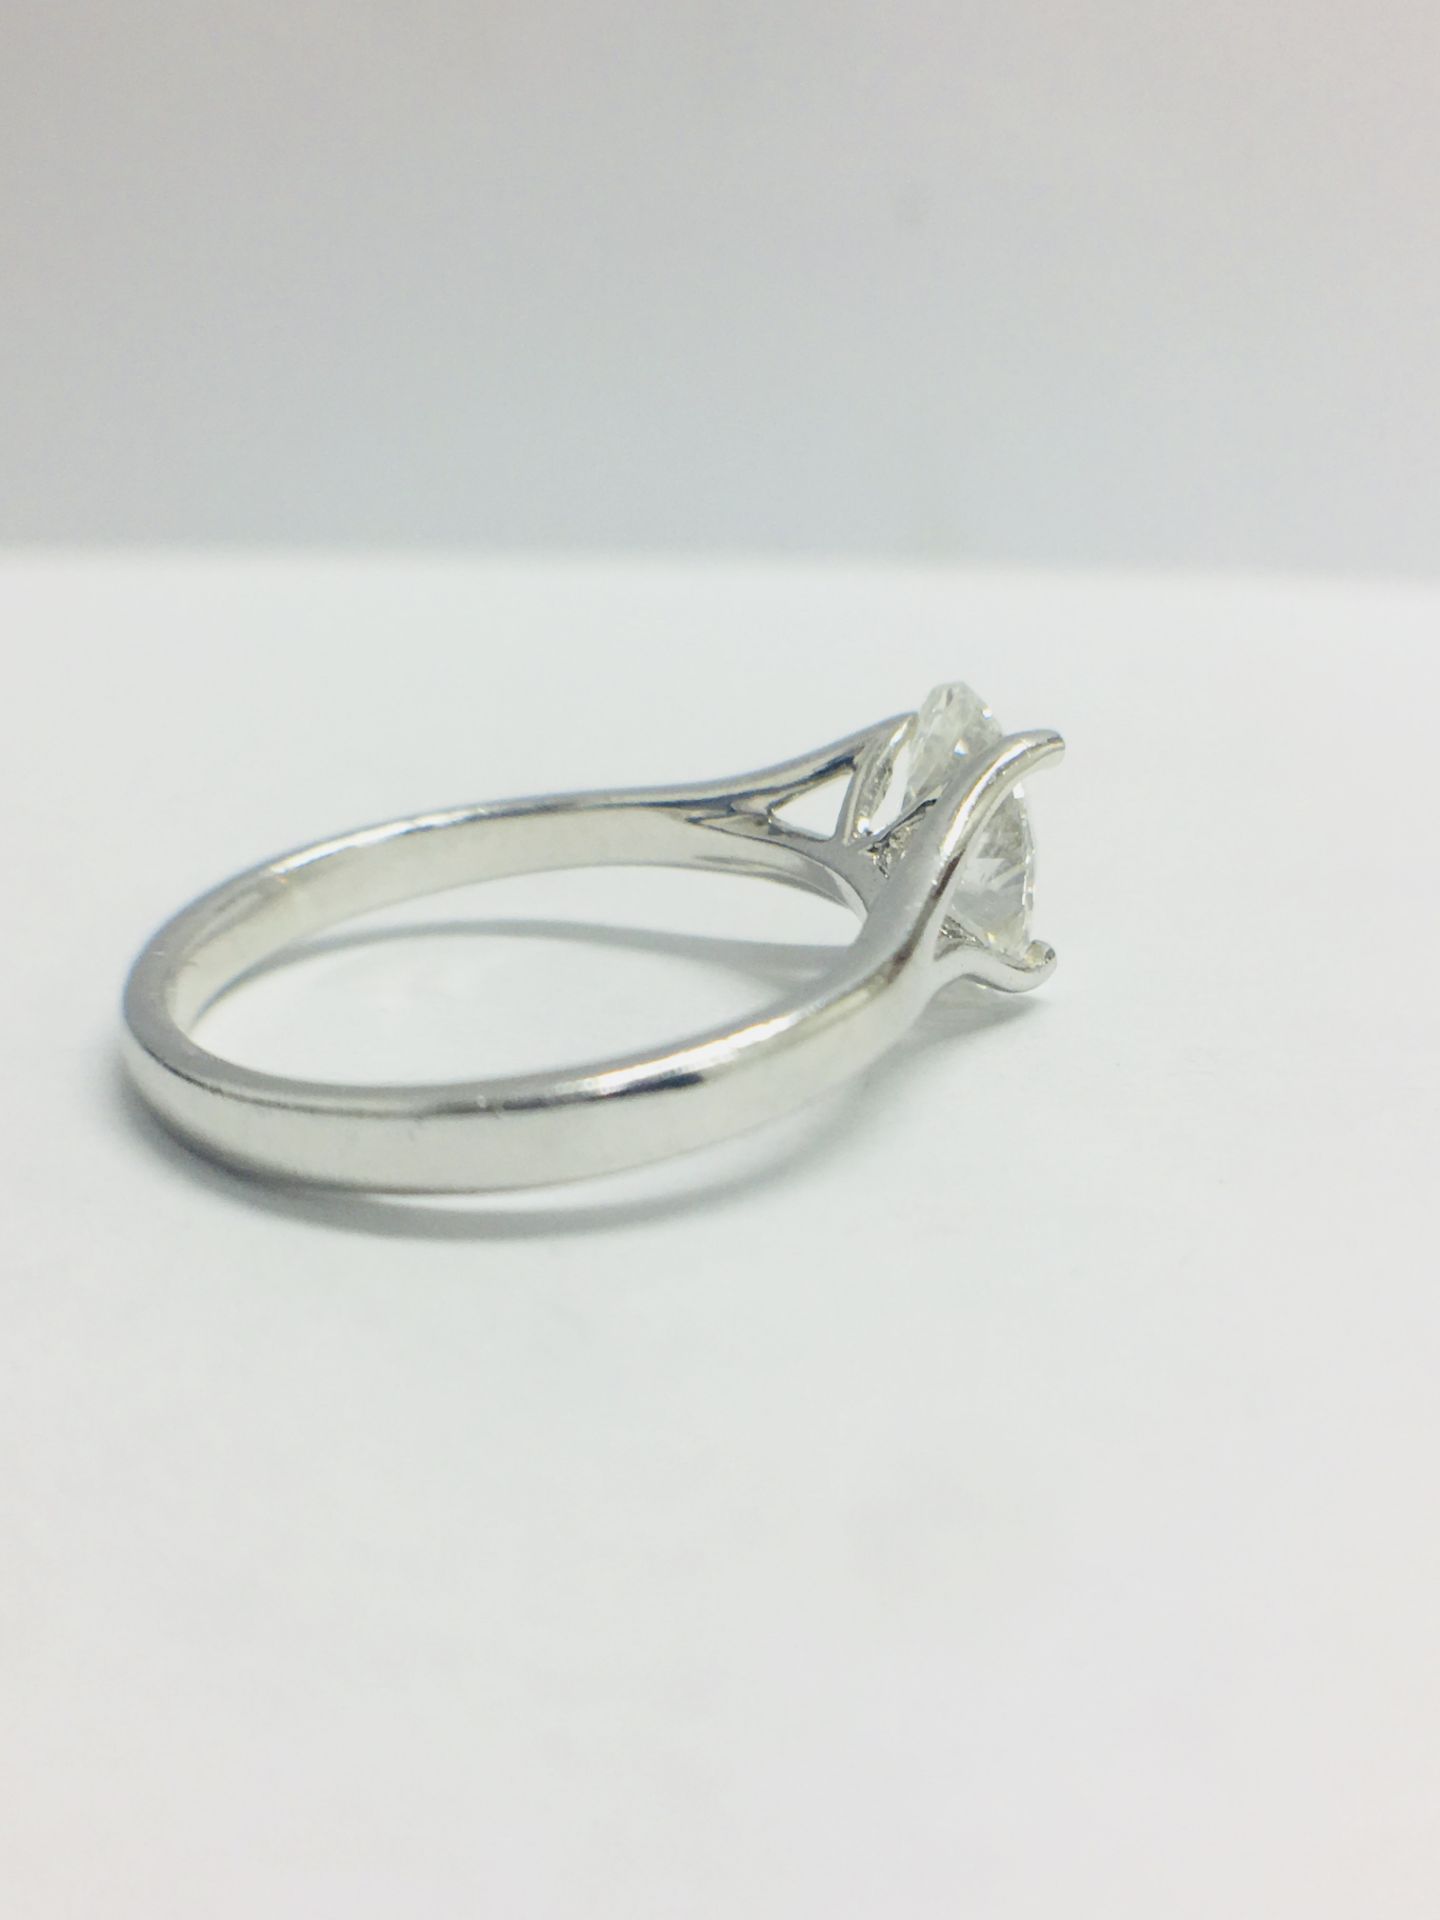 1Ct Oval Cut Diamond Solitaire Ring, - Image 7 of 11